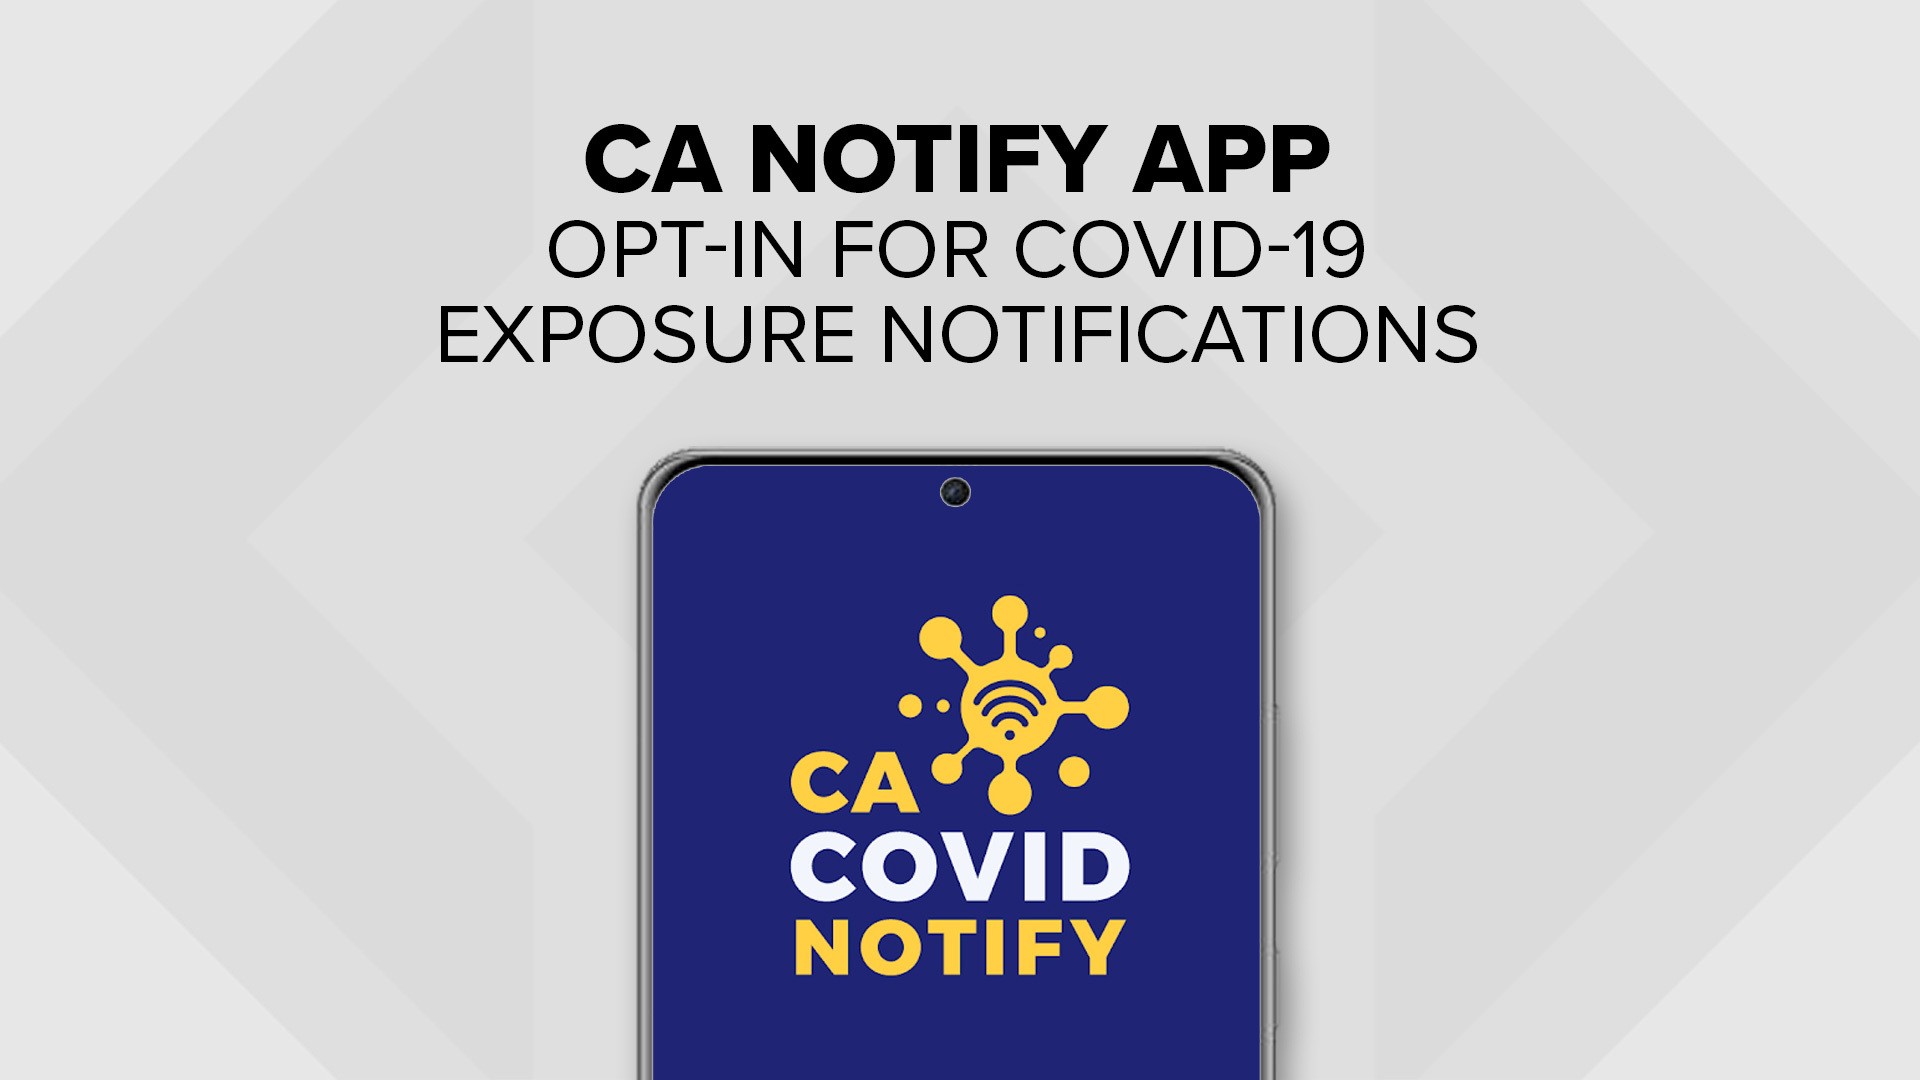 The CA Notify is an opt-in app and users can select to receive notifications.